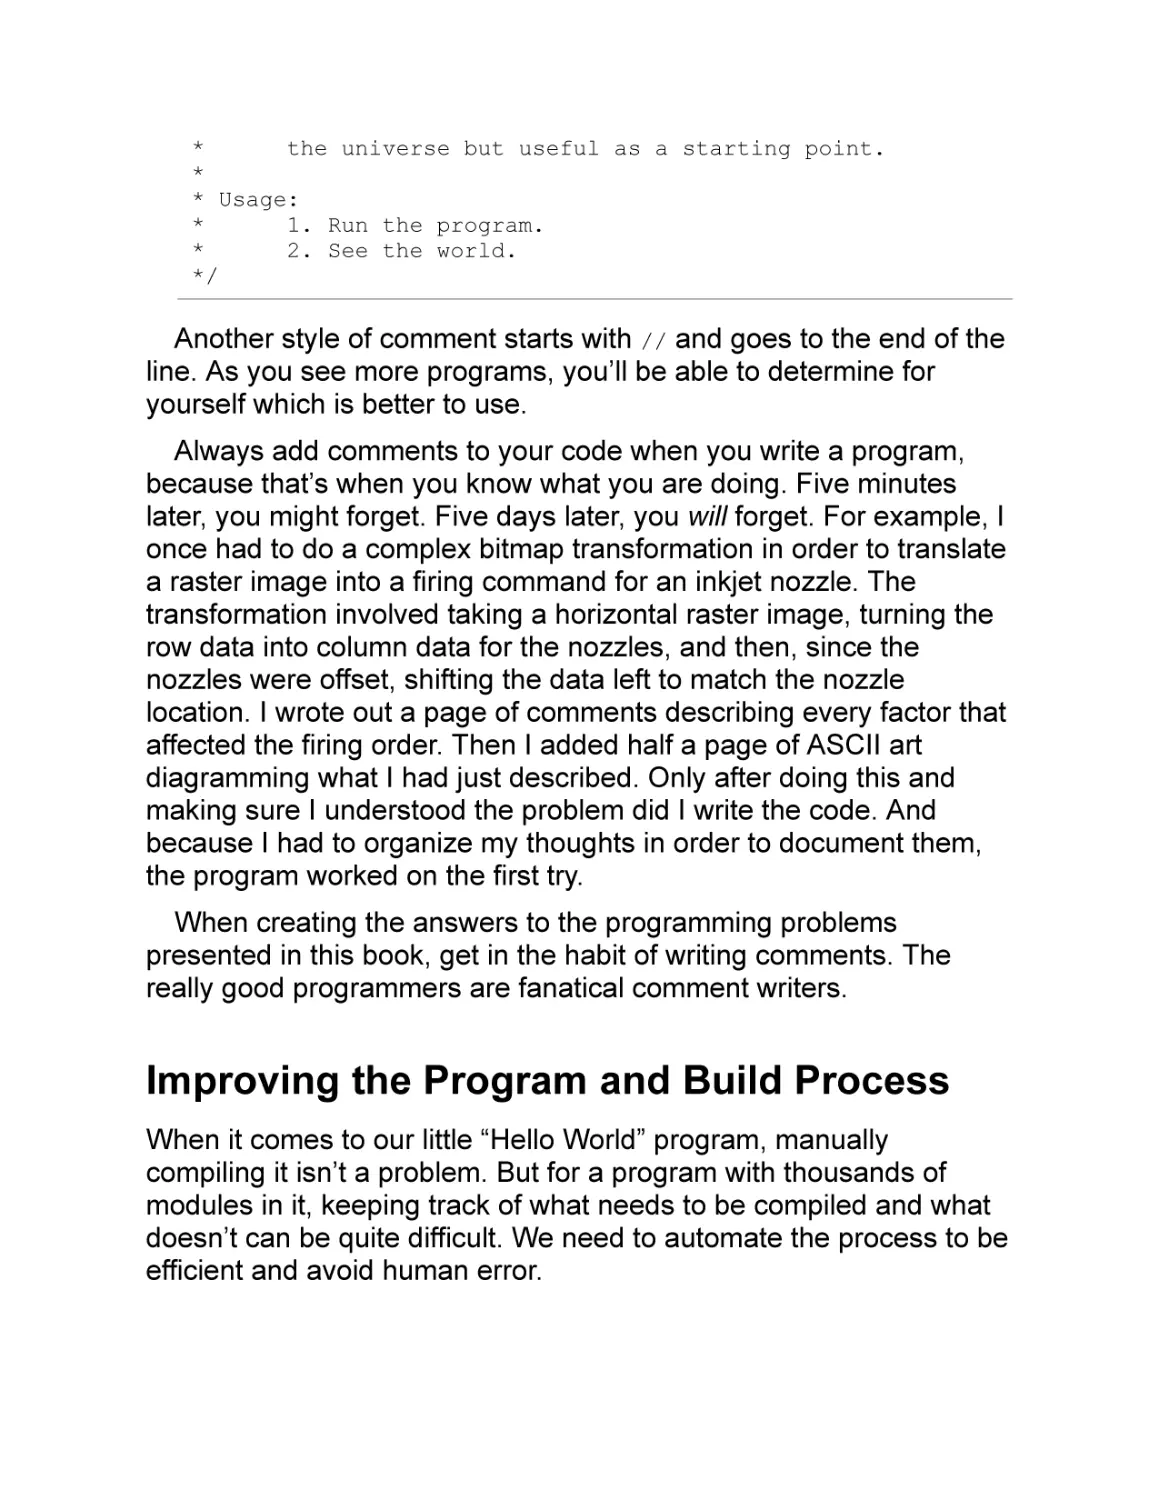 Improving the Program and Build Process